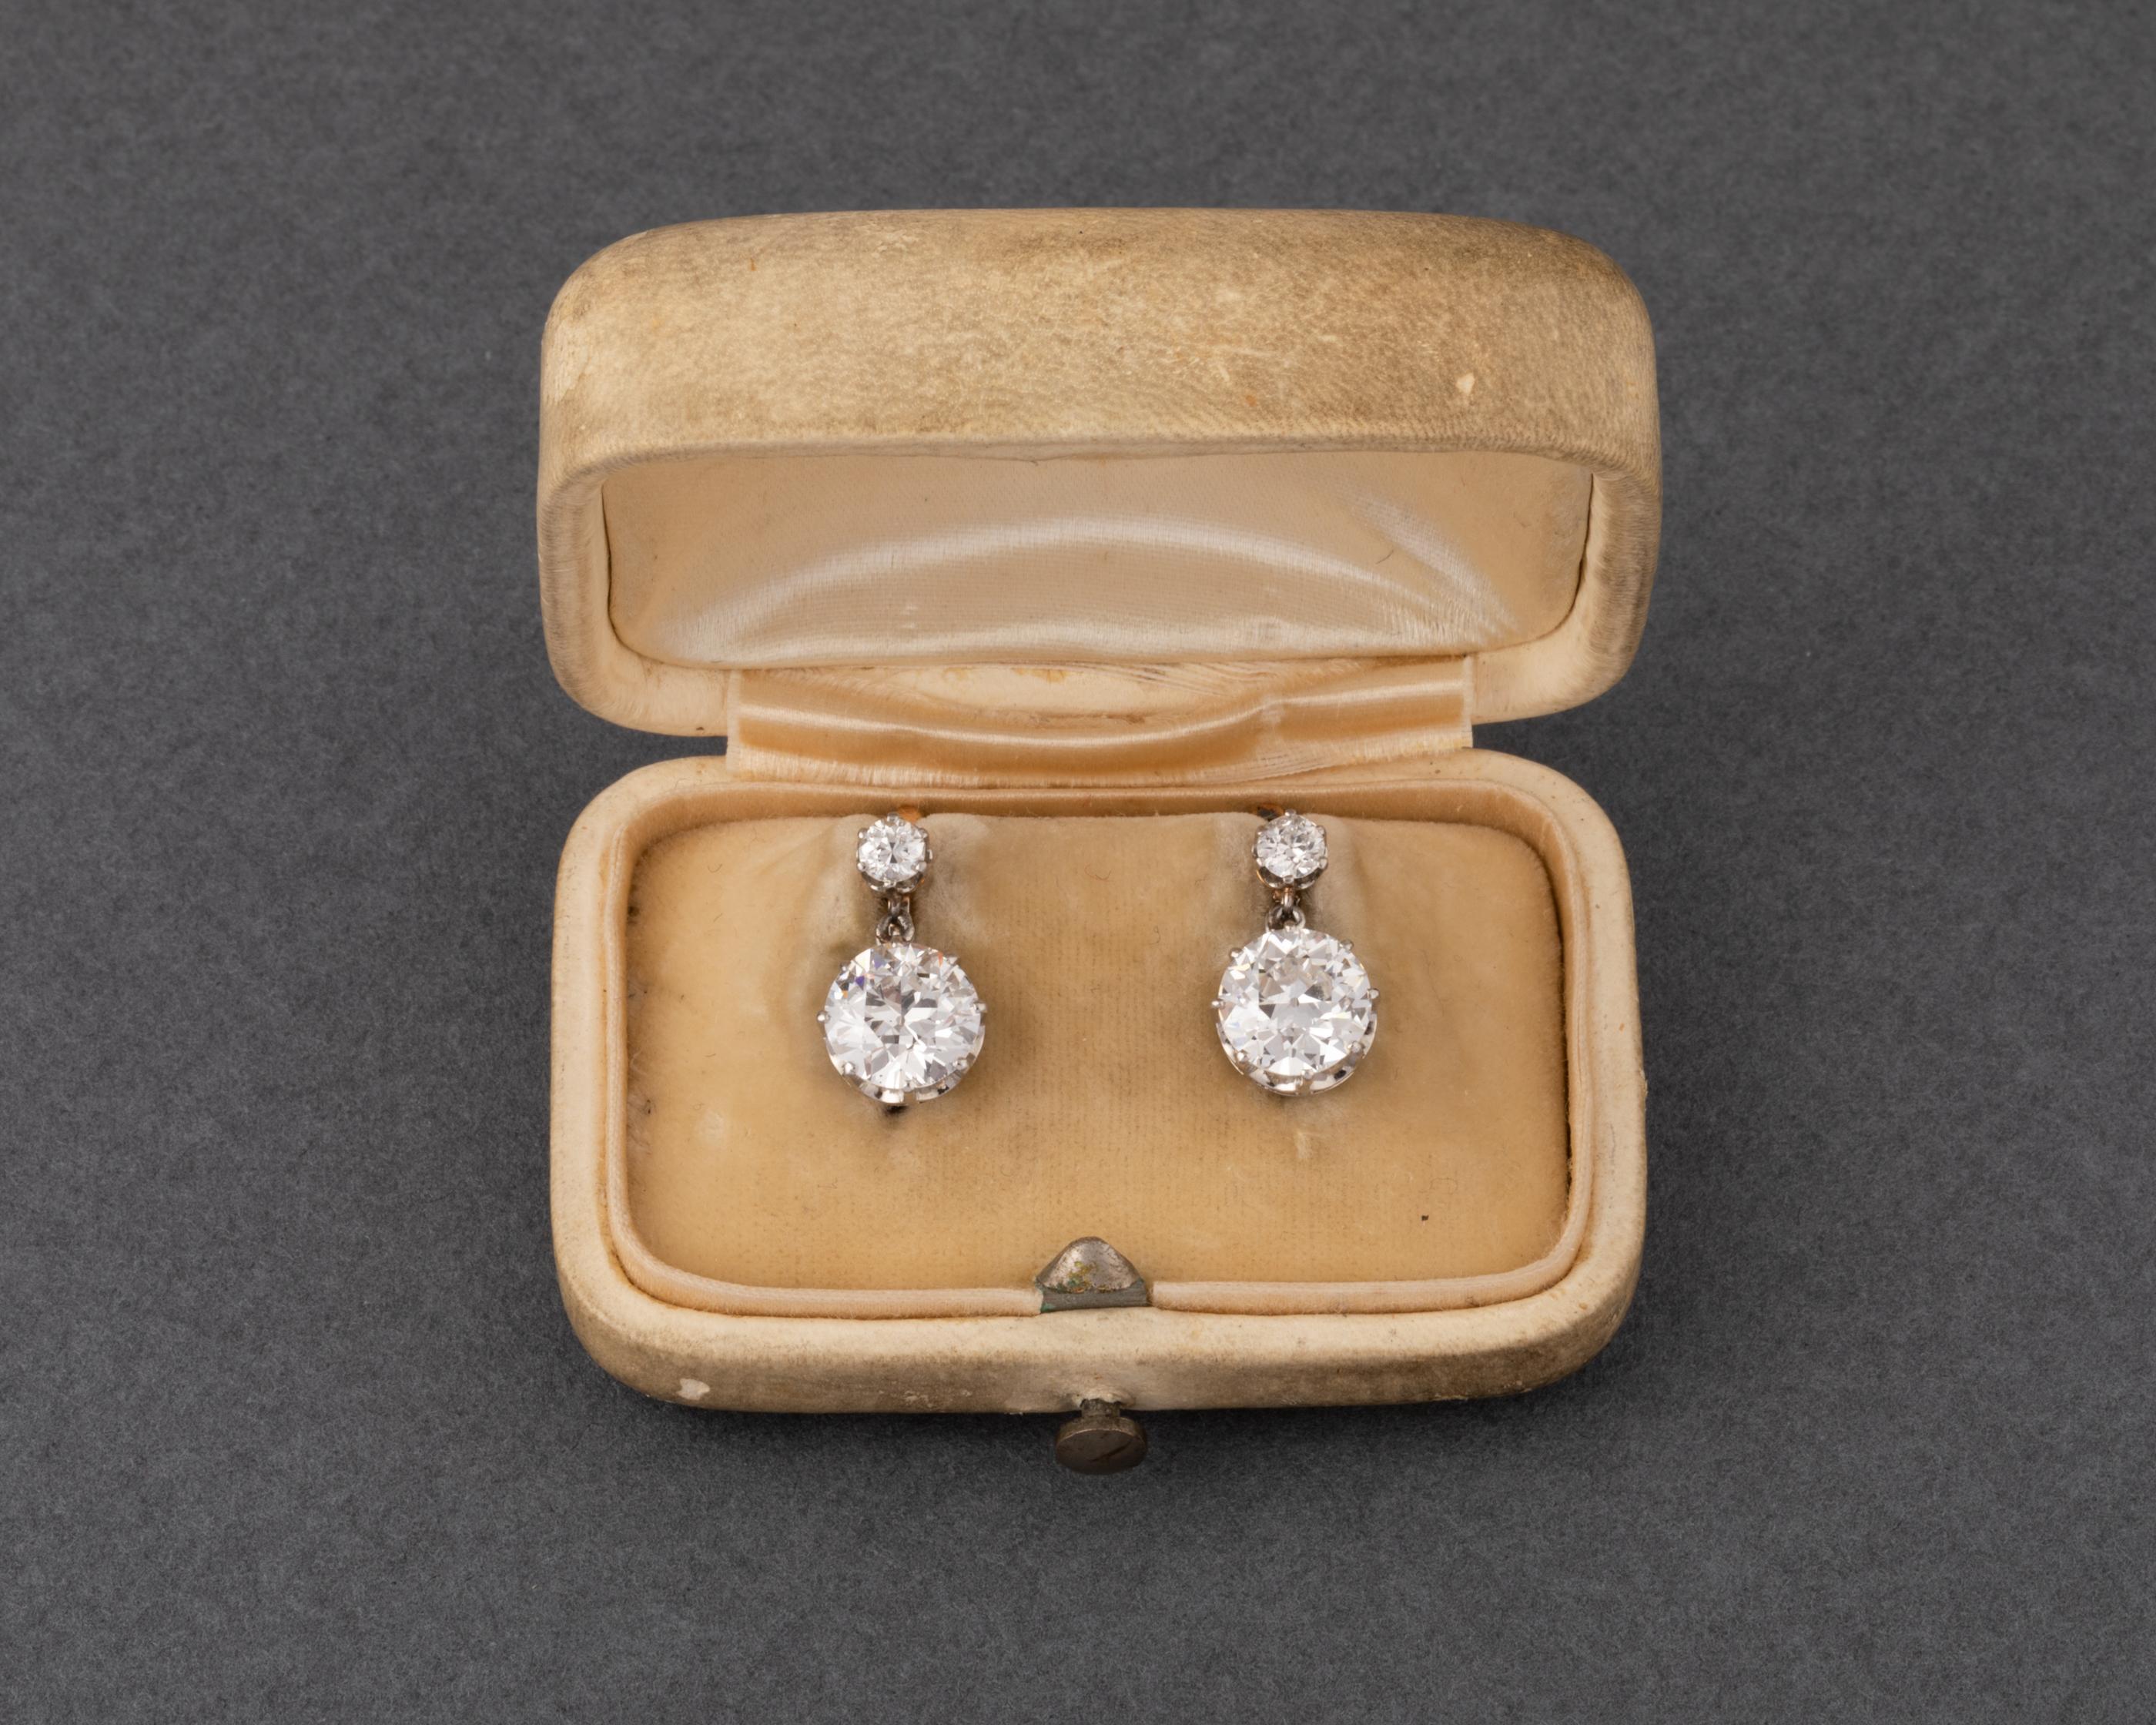 One very beautiful pair of antique Belle Epoque earrings, made in France circa 1900.
In a boxe of the great jewelry family Sandoz.
The two principal diamonds weights 1.80 and 1.76 exactly. 
They are extra white color: E/F color for my estimation,